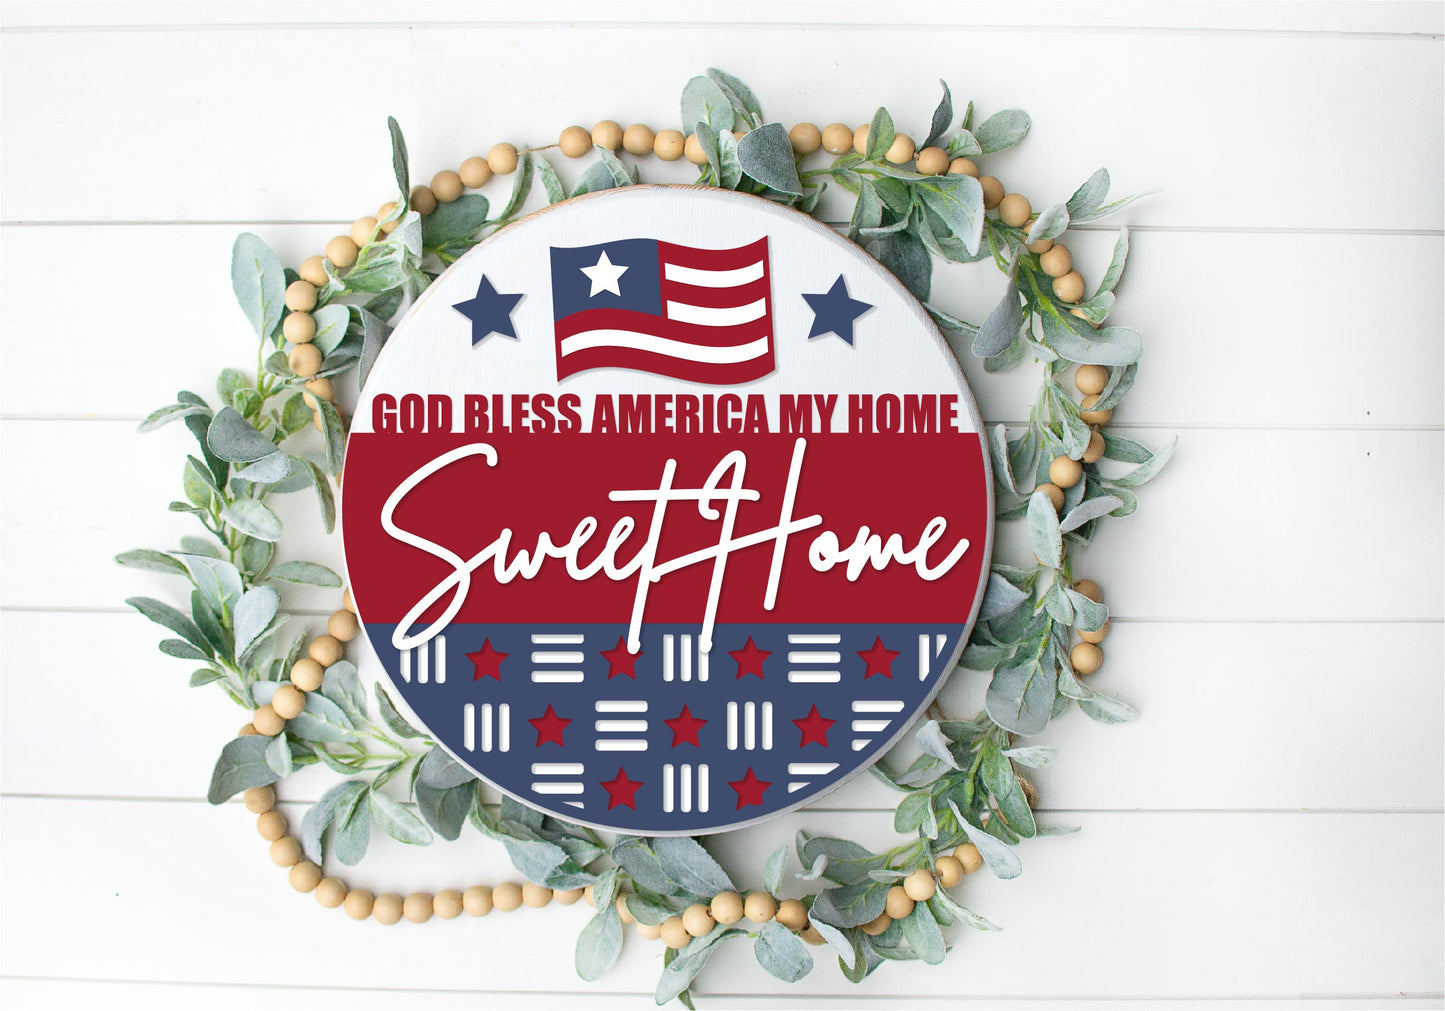 God Bless American Home Sweet Home sign